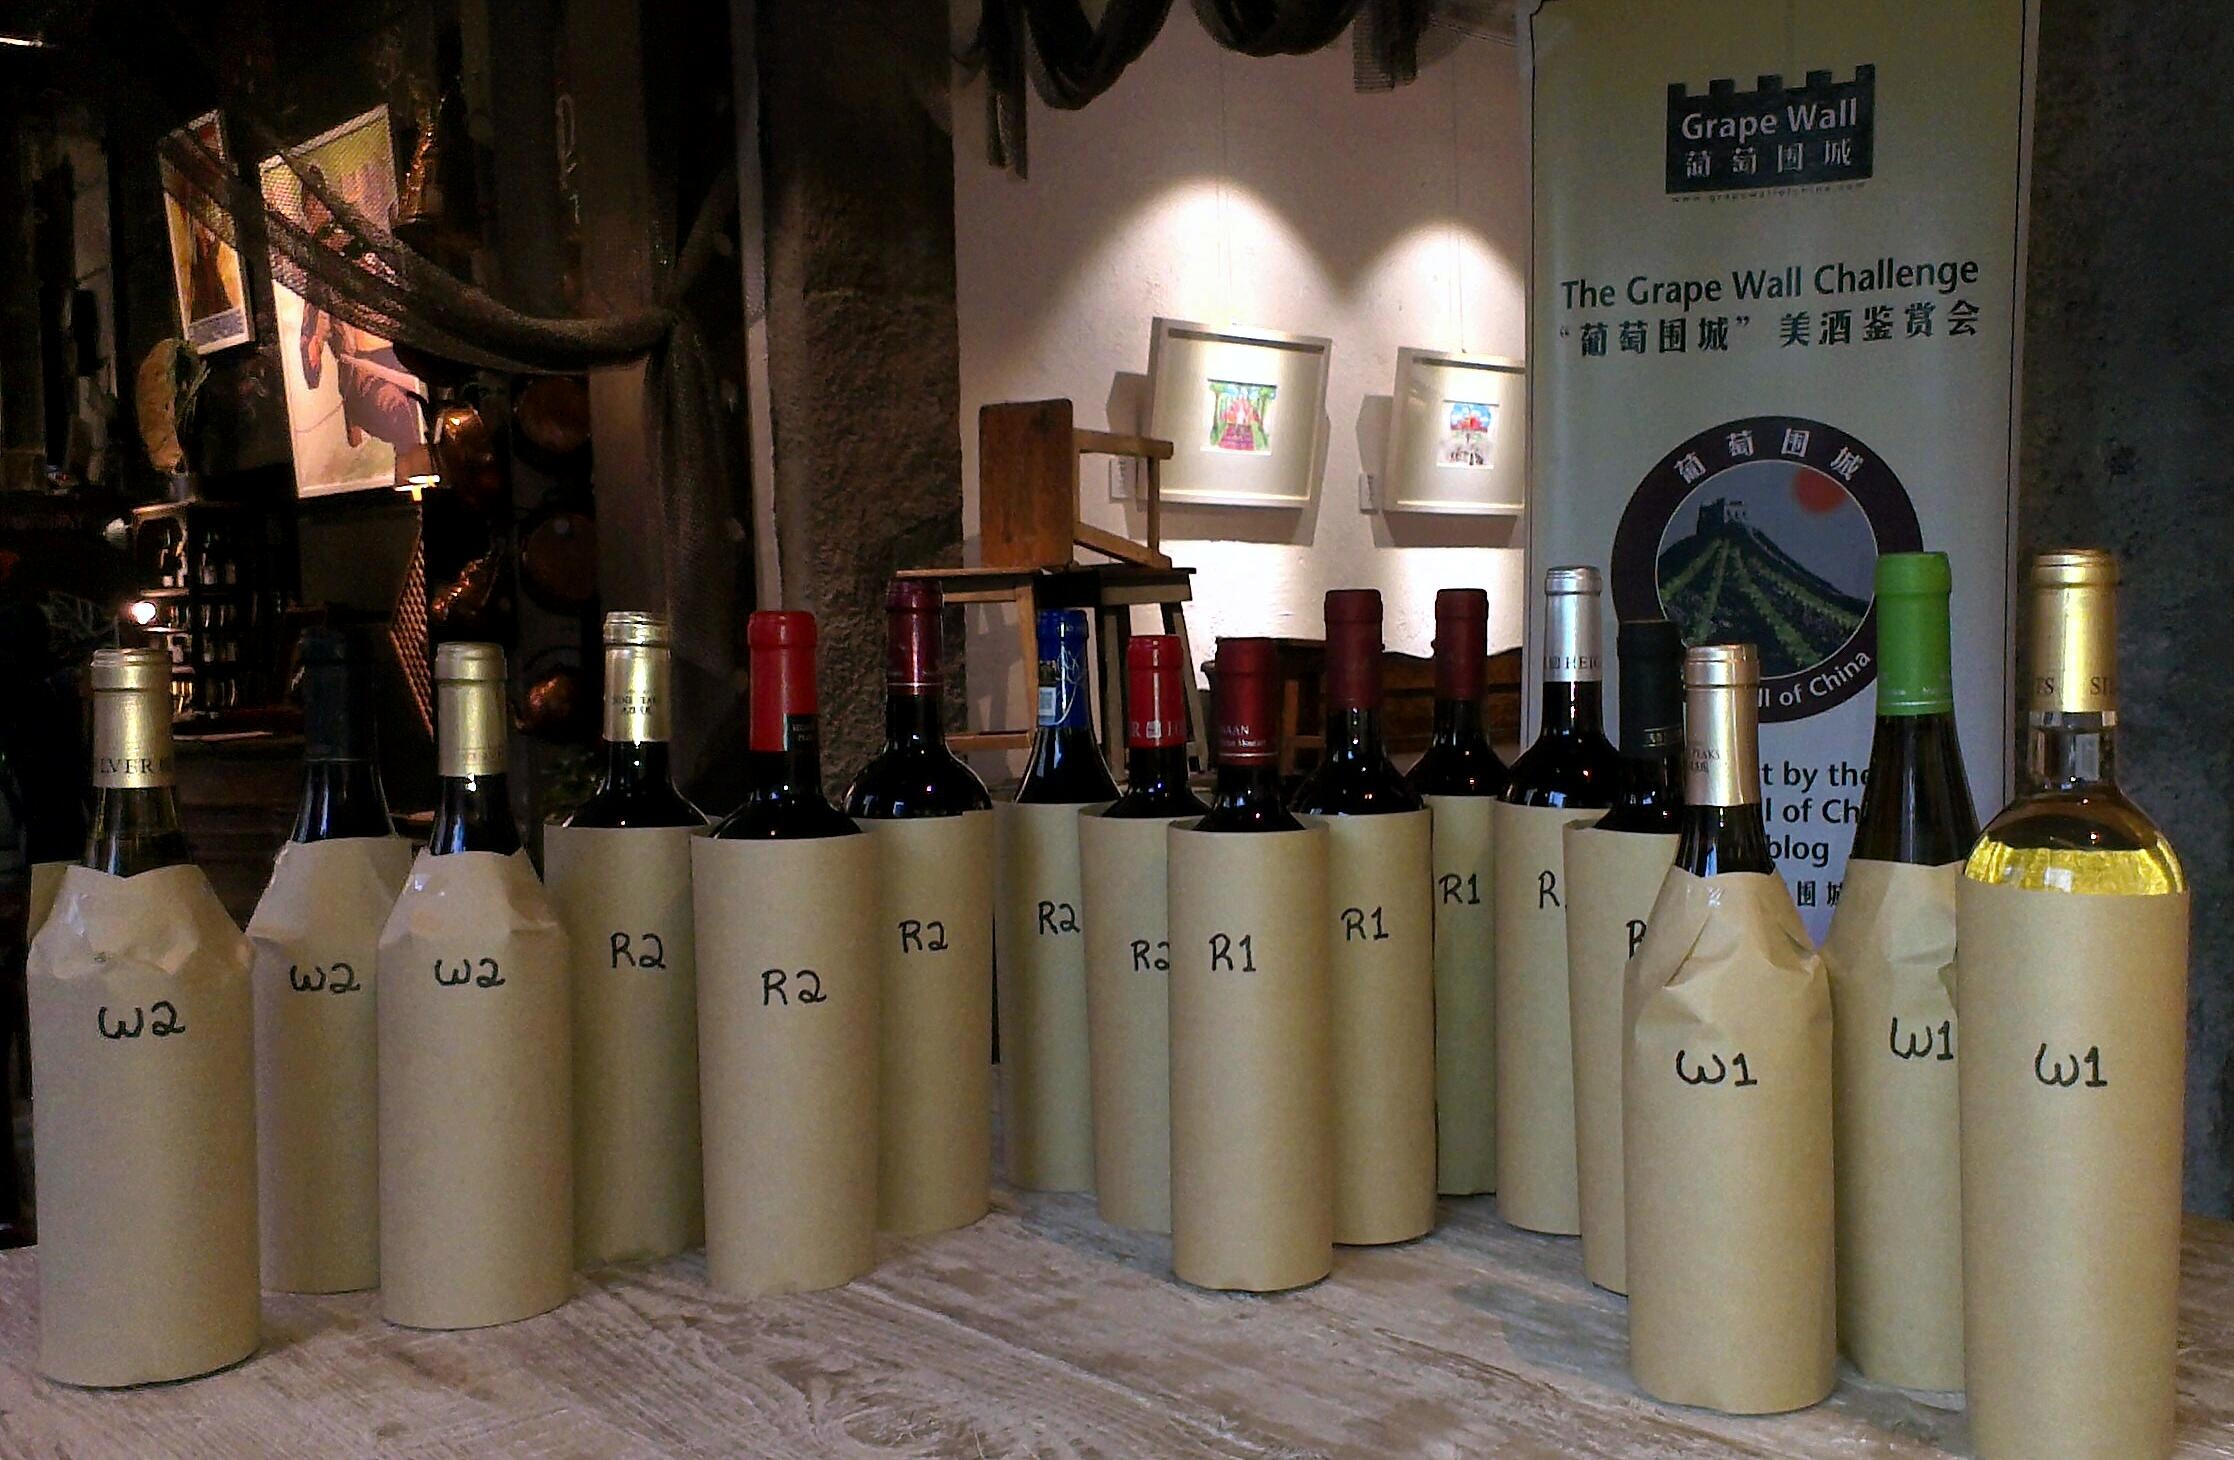 gwc grape wall challenge 8 chinese wines at pop-up beijing (10)